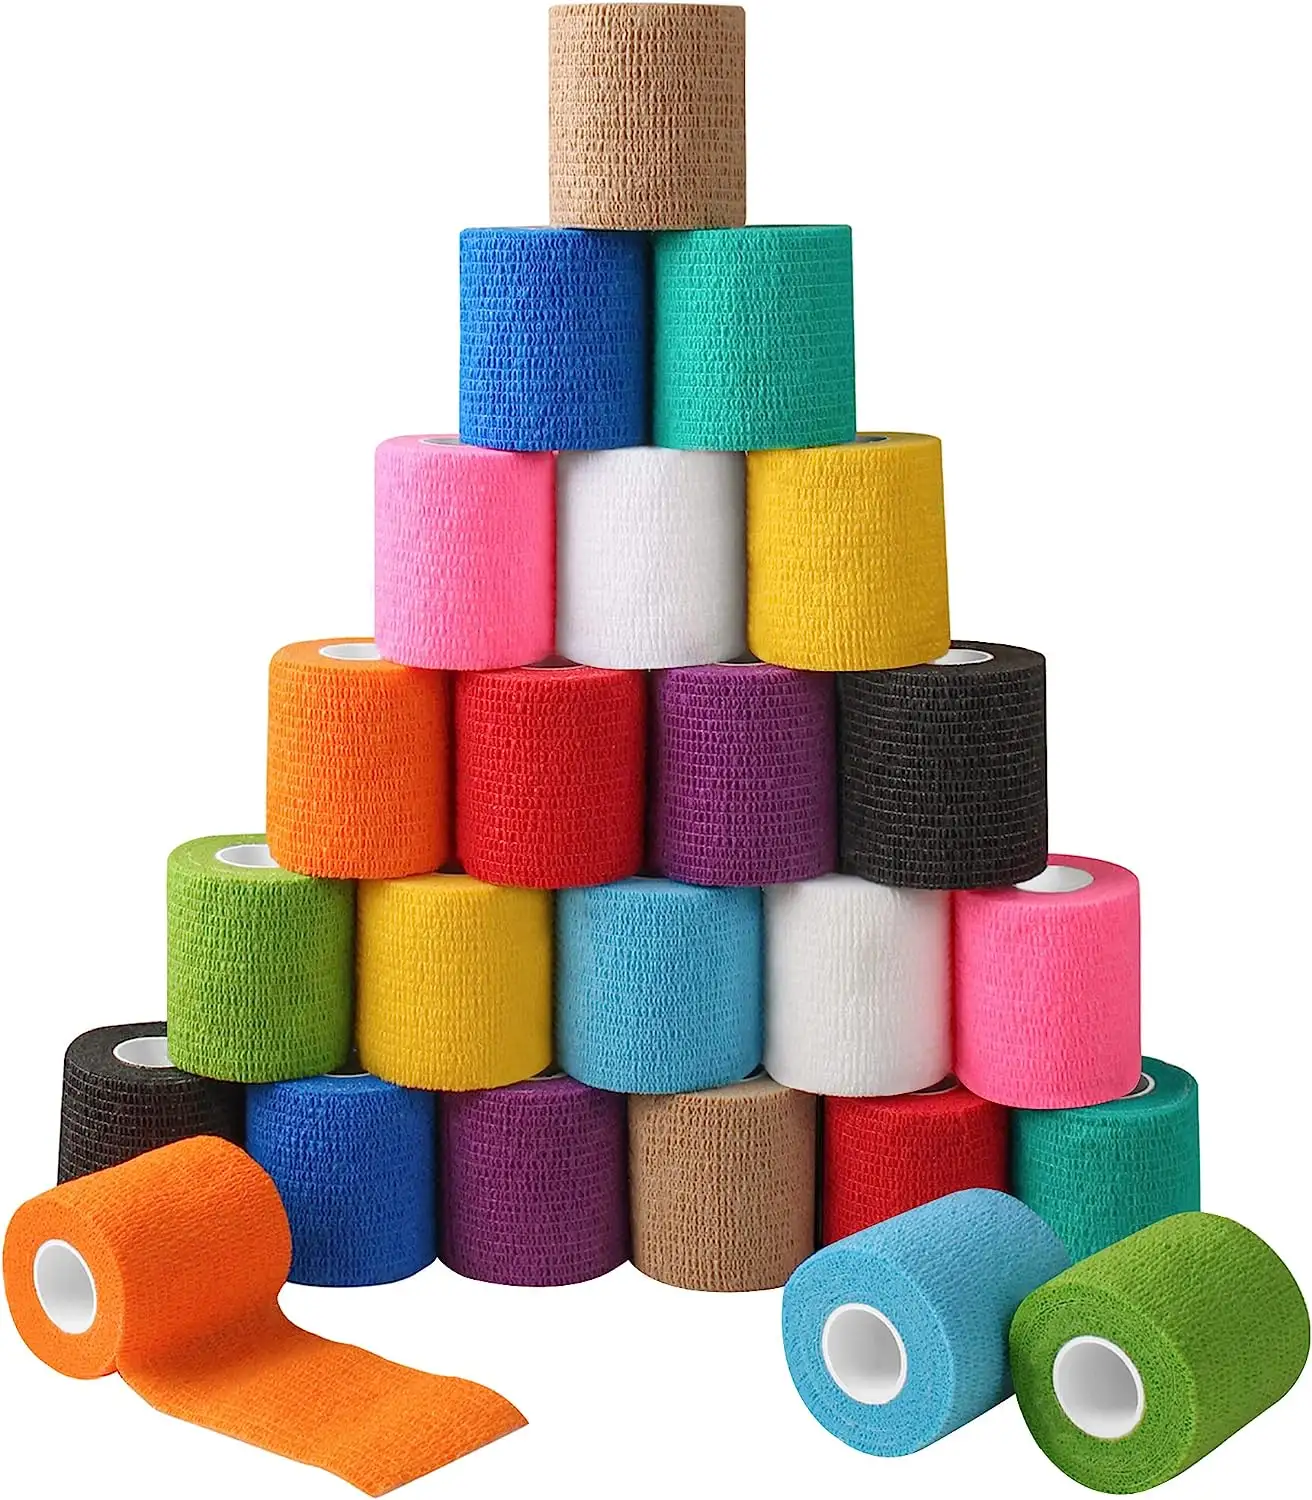 Hyposensitive Breathable Pattern design 5 CM*4.5 M Cohesive Bandage For Sport and Care and Pet